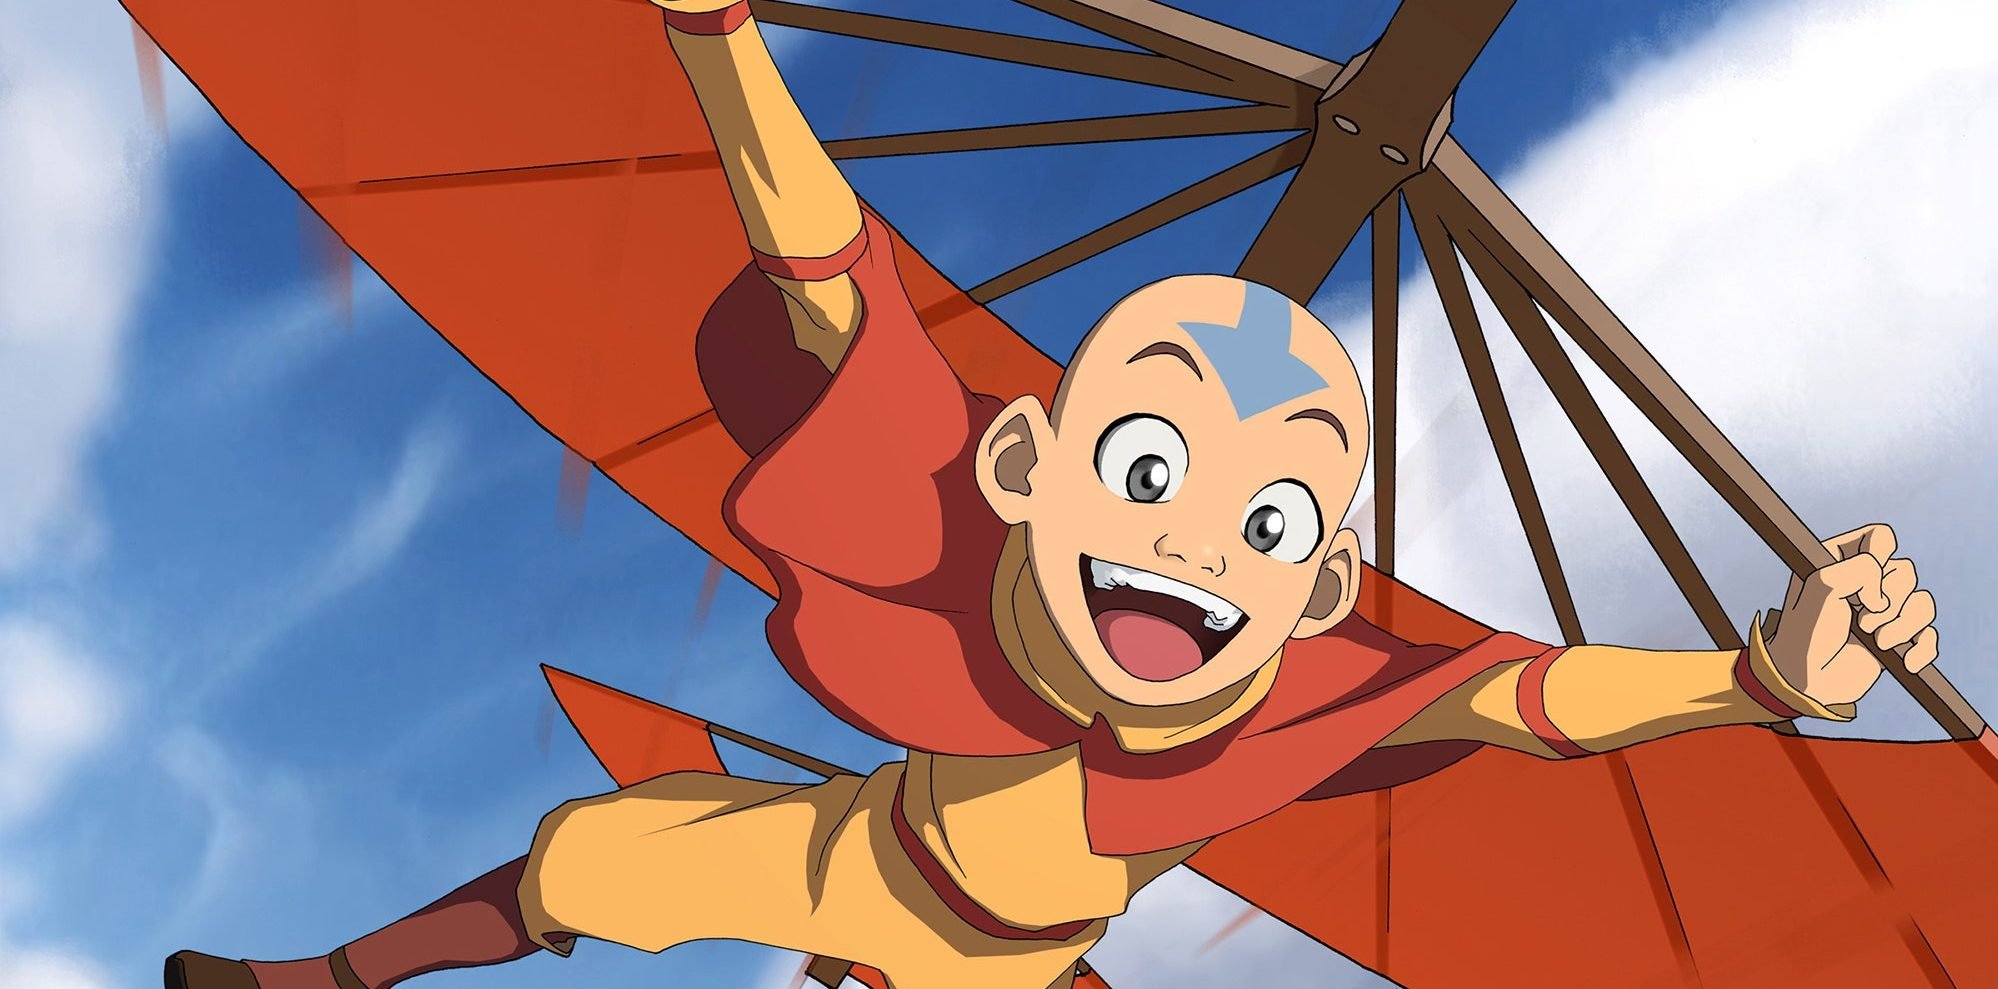 The 15 Best Avatar The Last Airbender Episodes, Ranked